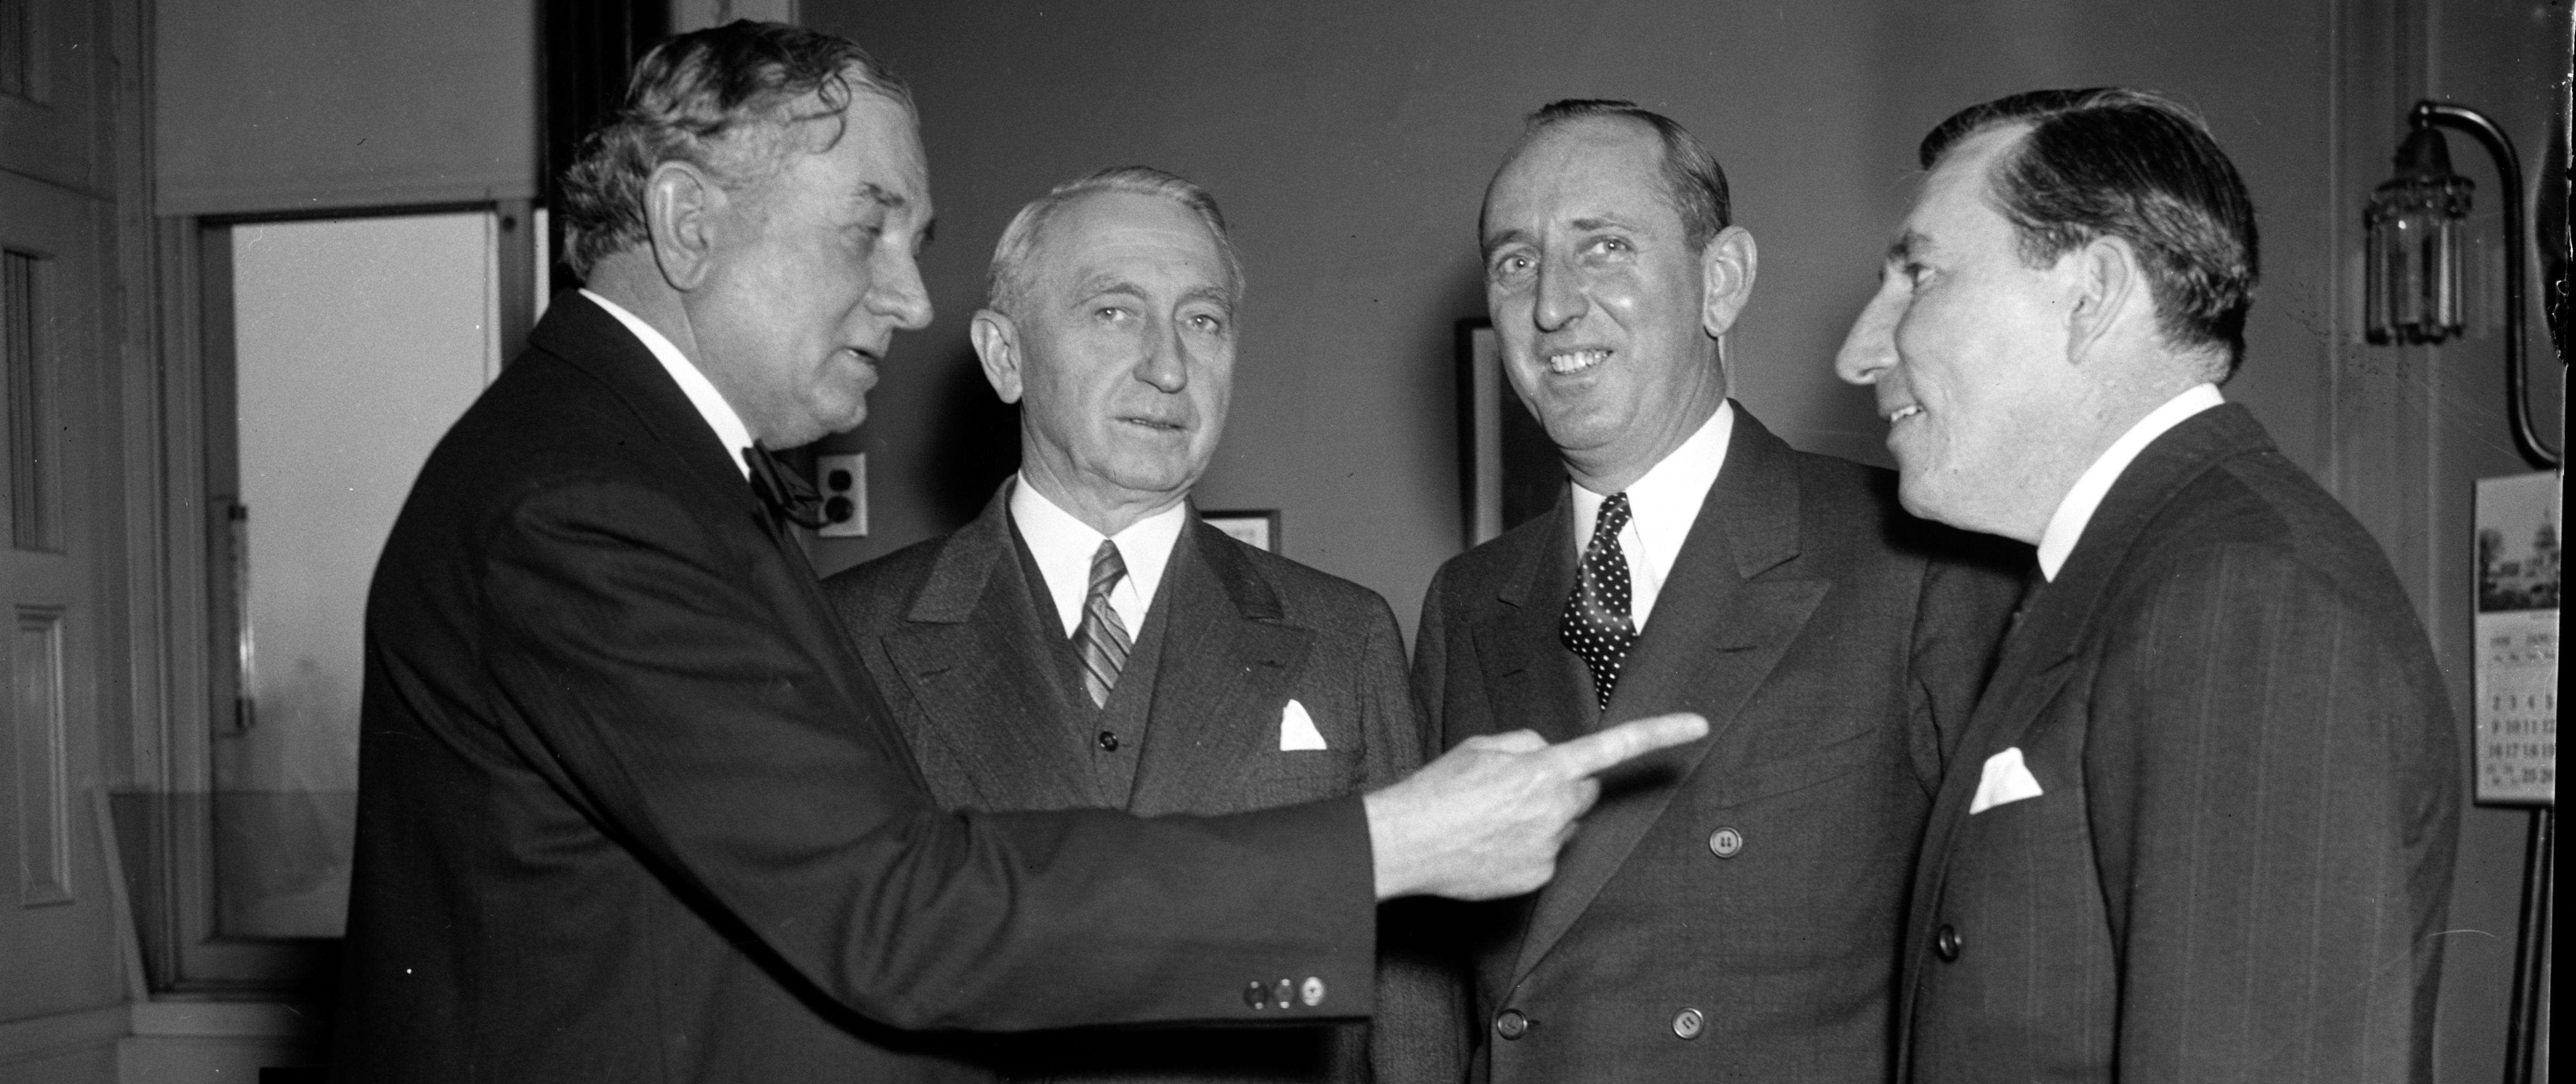 Filibuster against anti-lynching bill. Washington, D.C., Jan. 27. Members of the bloc of Southern Senators who have been filibusting against the anti-lynching bill for the last 20 days and are still going strong, left to right: Senator Tom Connaly, of Texas, Sen. Walter F. George, of Ga.; Sen. Richard Russell of Ga.; and Sen. Claude Pepper of Florida, Jan. 27, 1938. (Library of Congress)